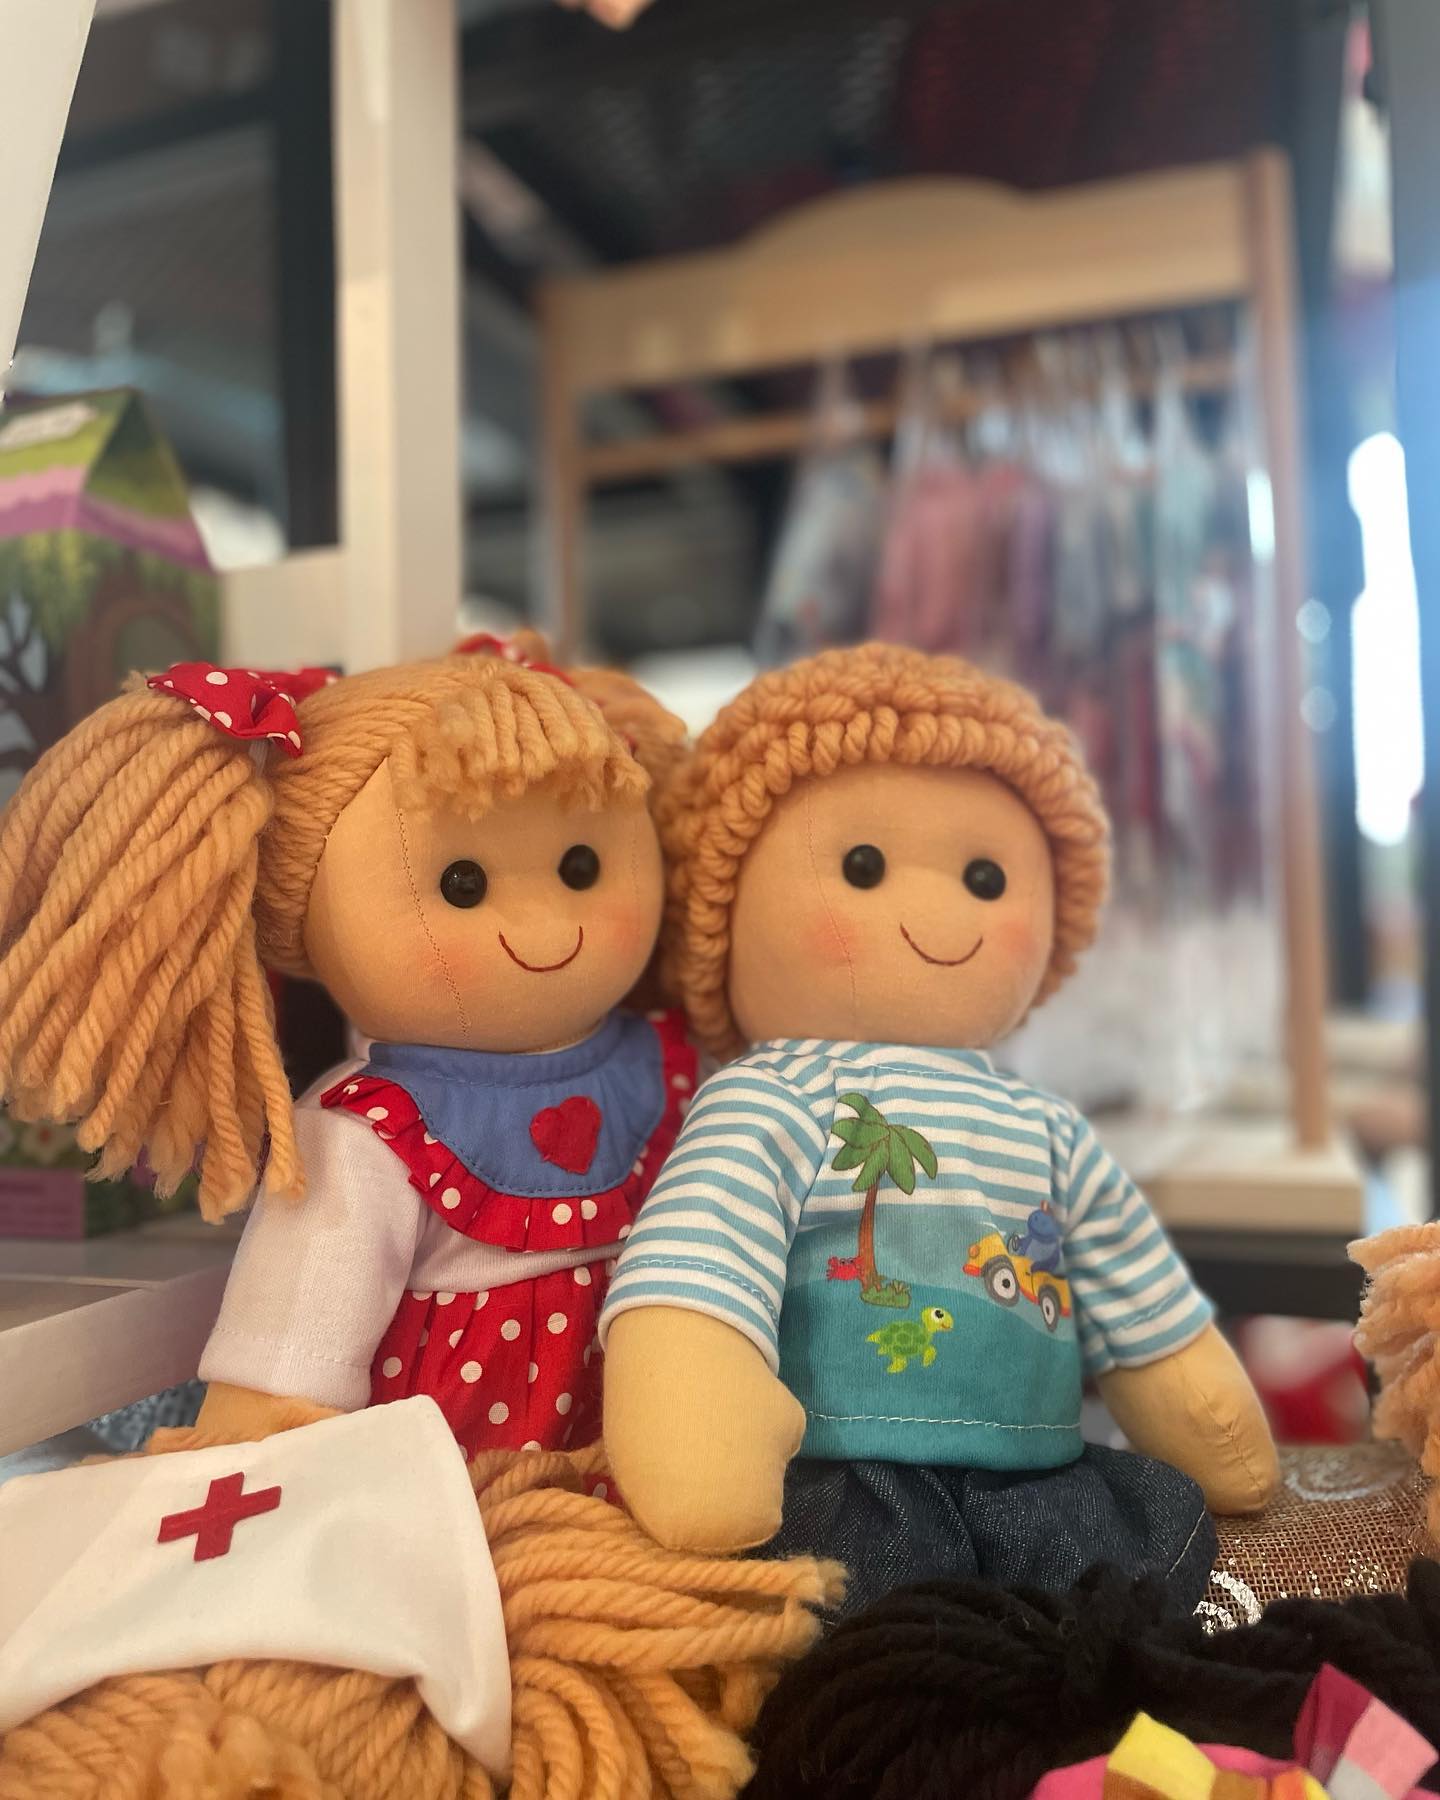 Dolls and doll accessories